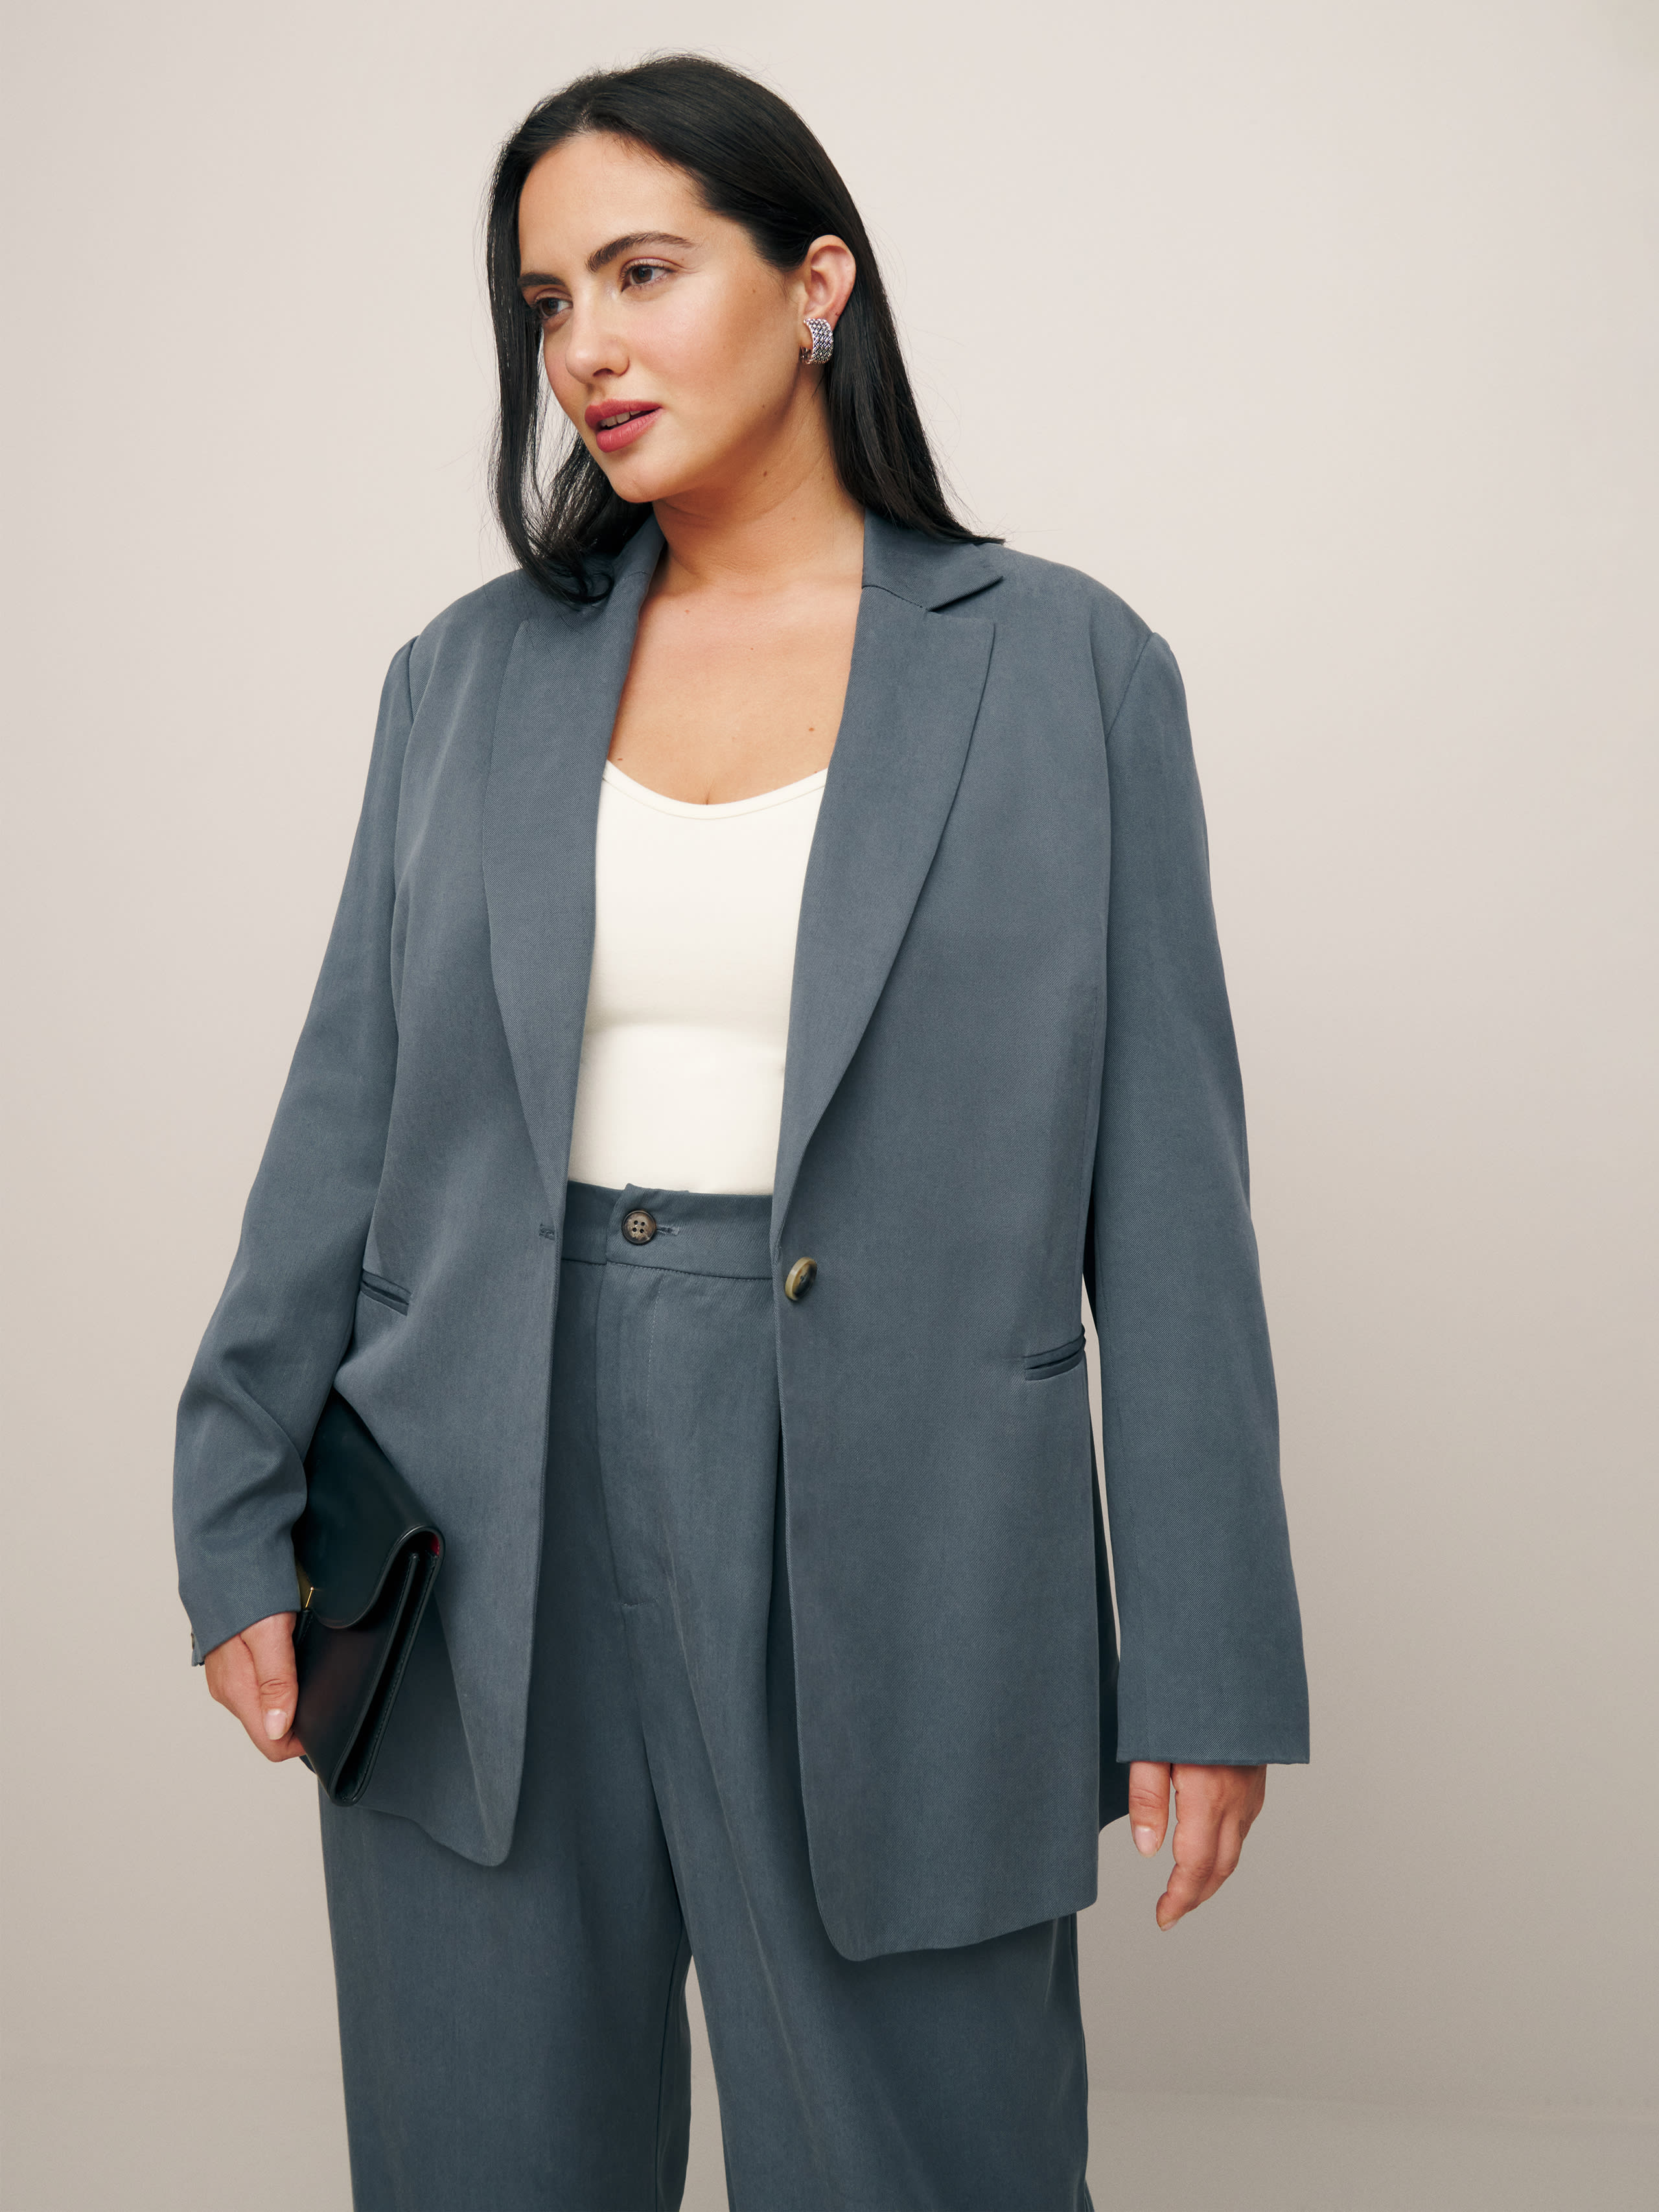 Reformation The Classic Relaxed Blazer Es In Slate